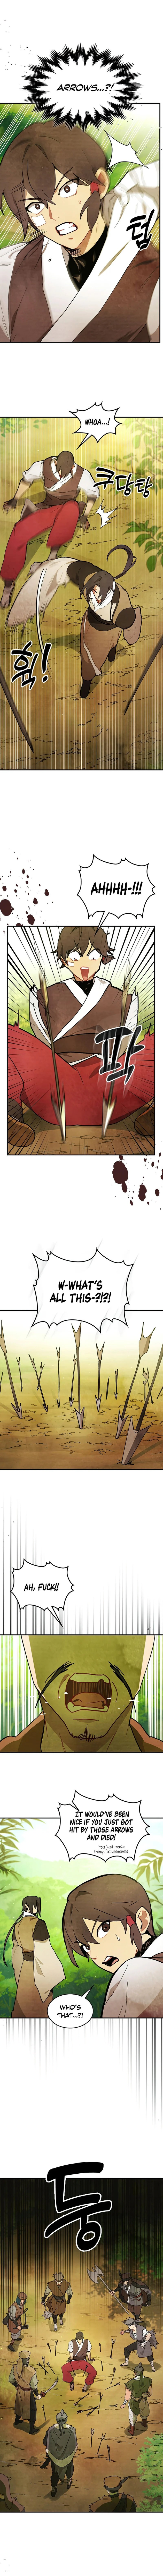 chronicles-of-the-martial-gods-return-chap-30-2